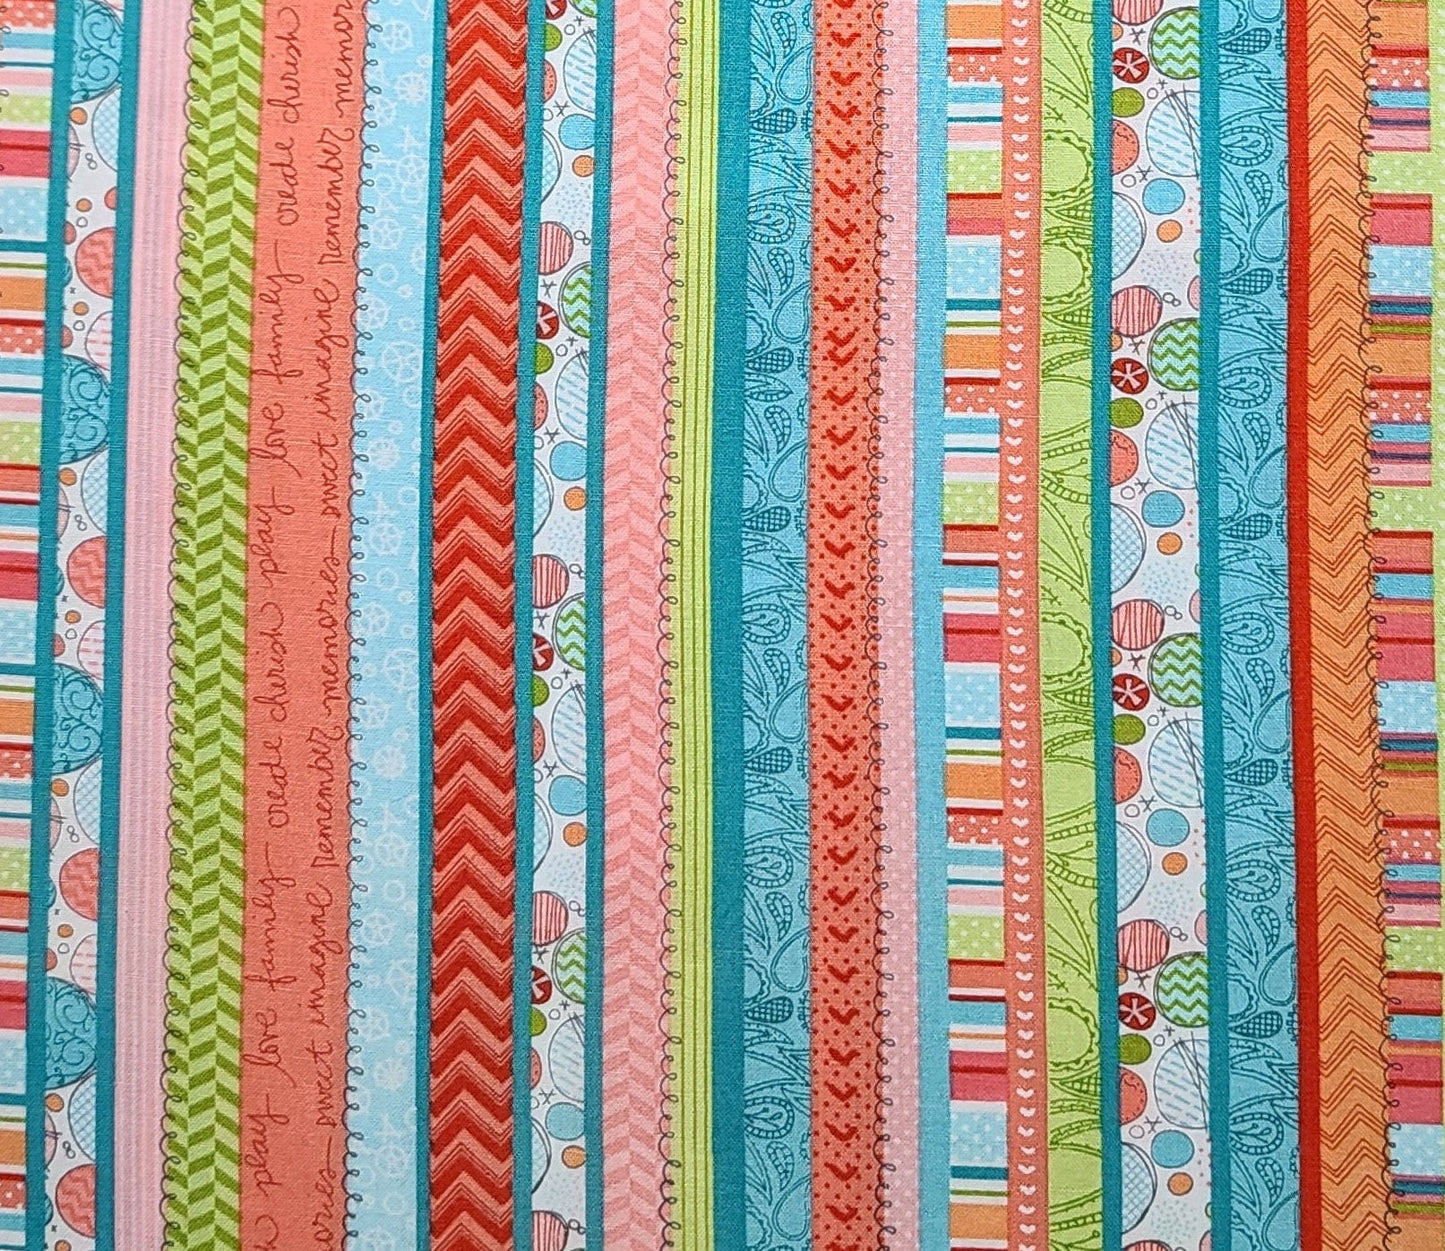 Heidi Grace for JoAnn Fabric - White, Teal, Red, Salmon, Pink, Lime Circles, Paisley, Swirl, Script Vertical Stripe (Parallel to Sel) Fabric